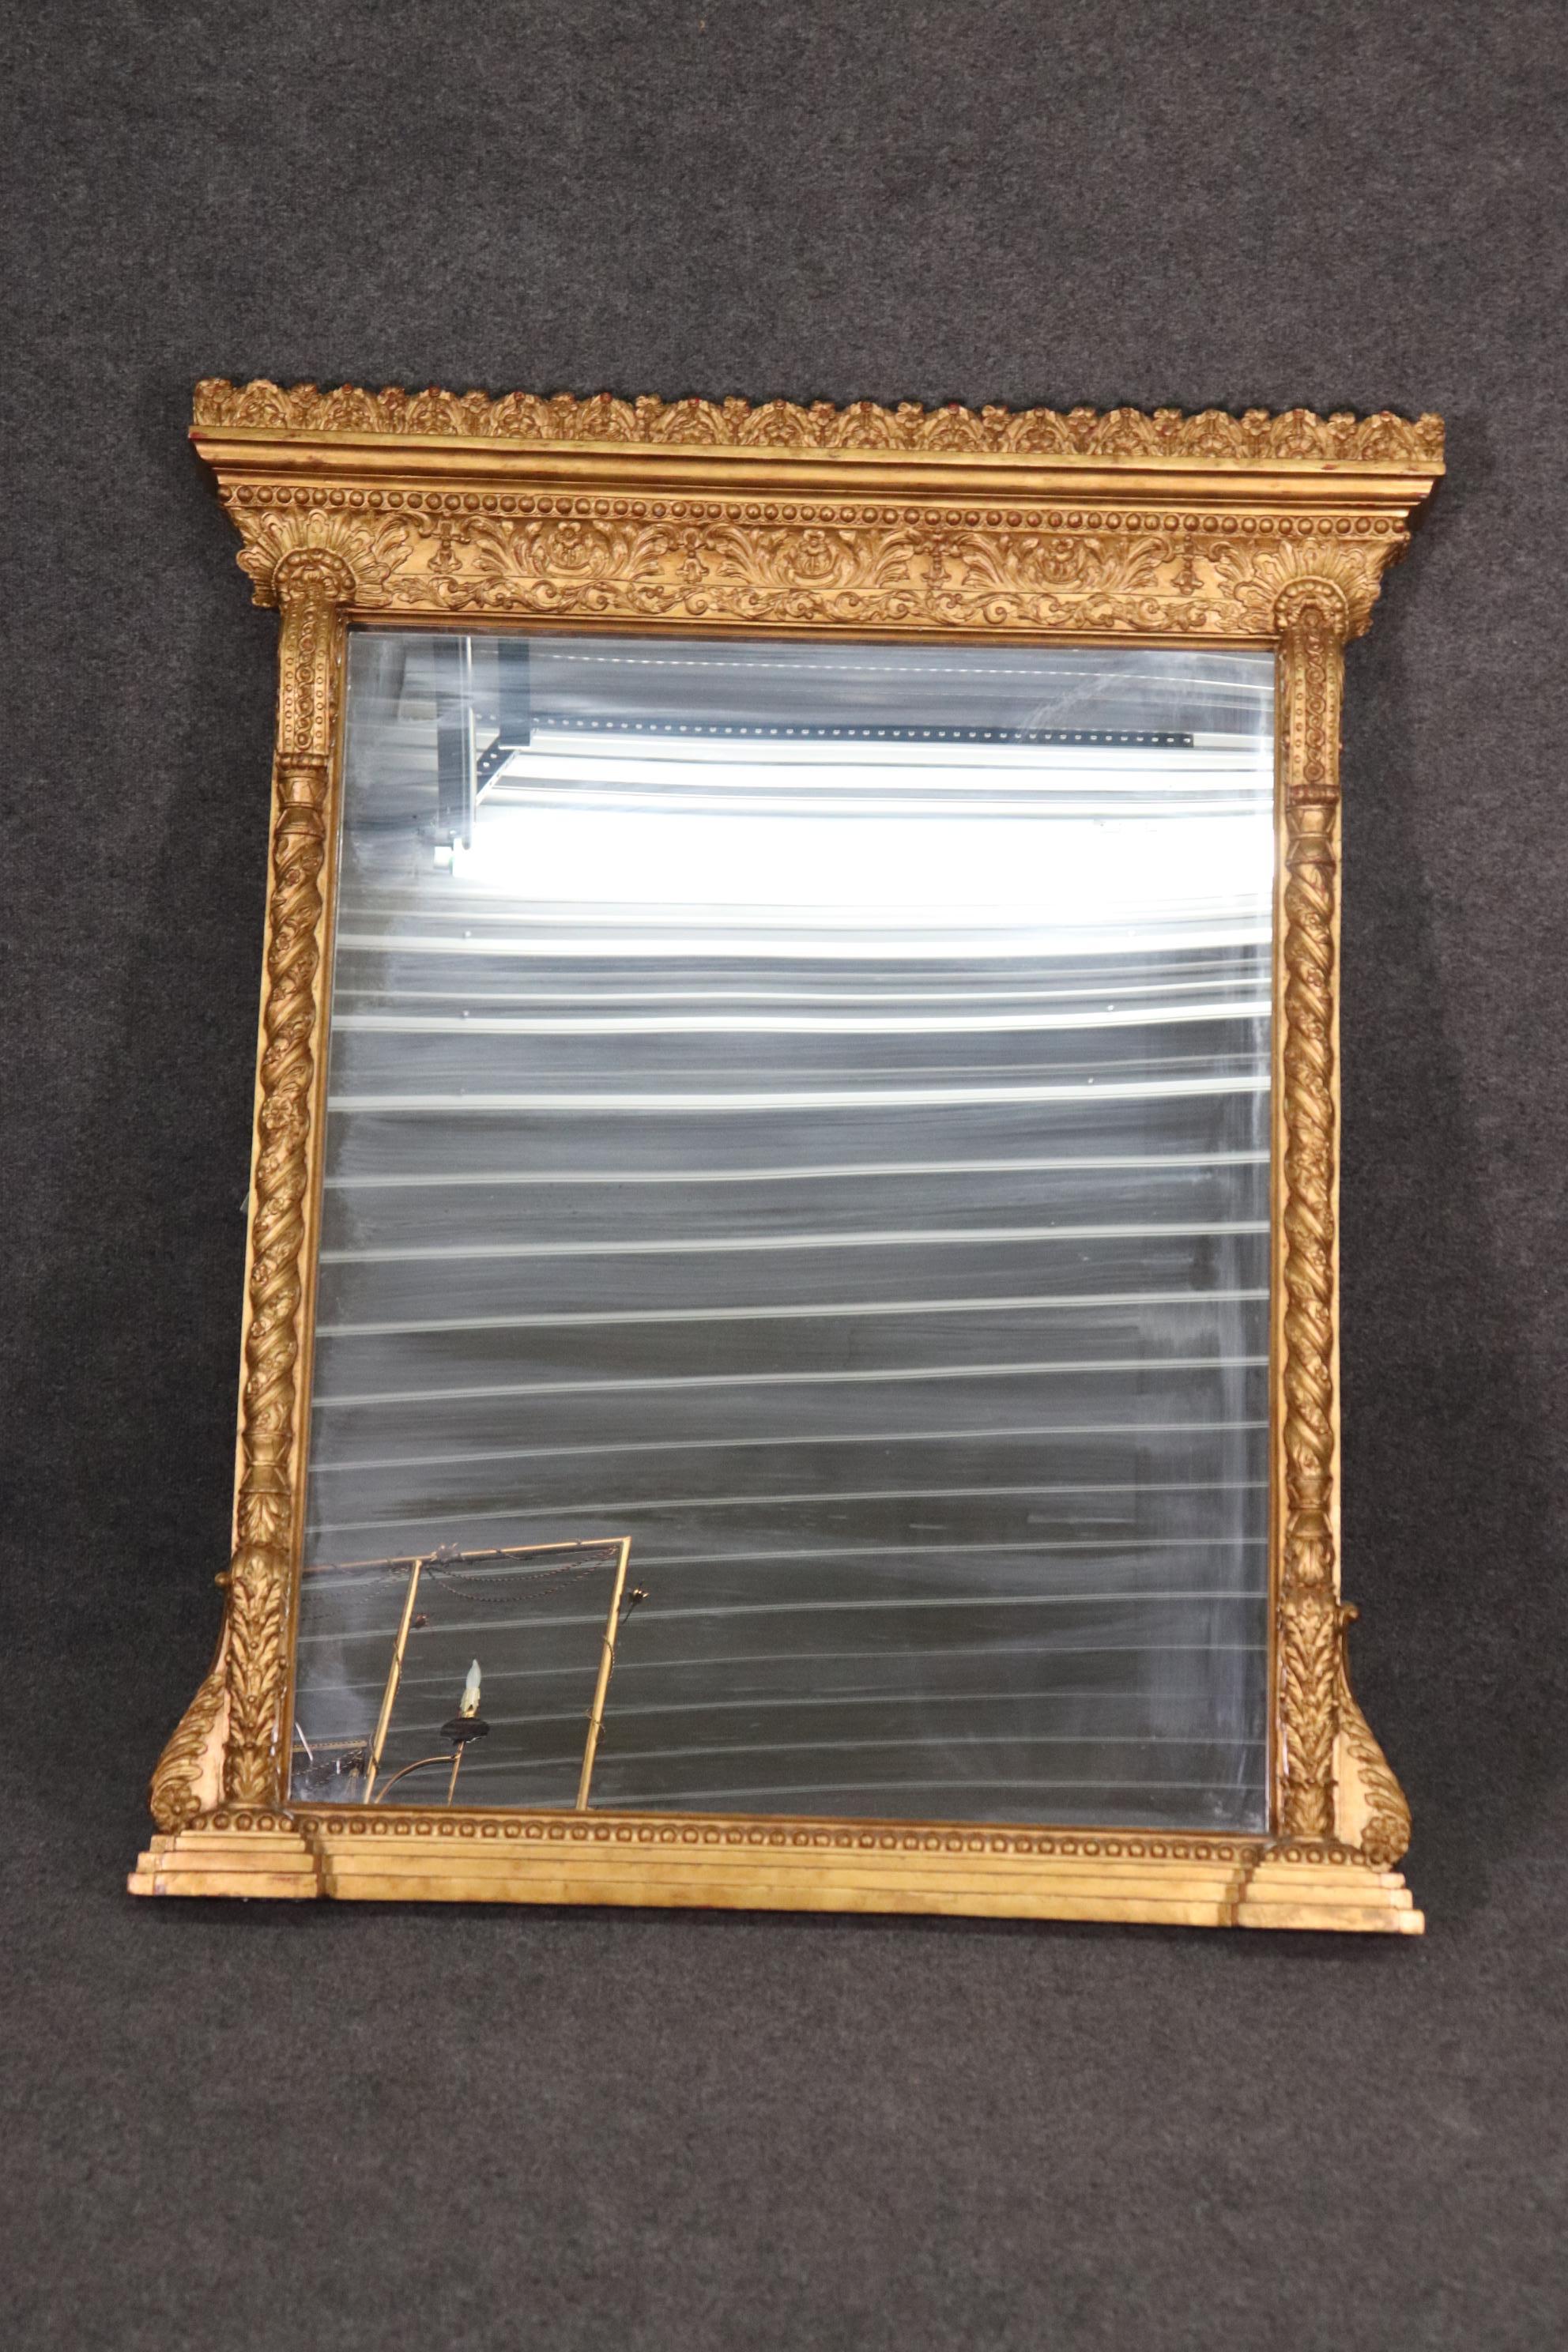 This is a genuine gold leaf gilded Martha Stewart mirror. The mirror is perfect for a mantle or even above a buffet. The mirror measures 53 tall x 44.5 wide x 4 deep. The mirror dates to the 1990s and is in very good condition.